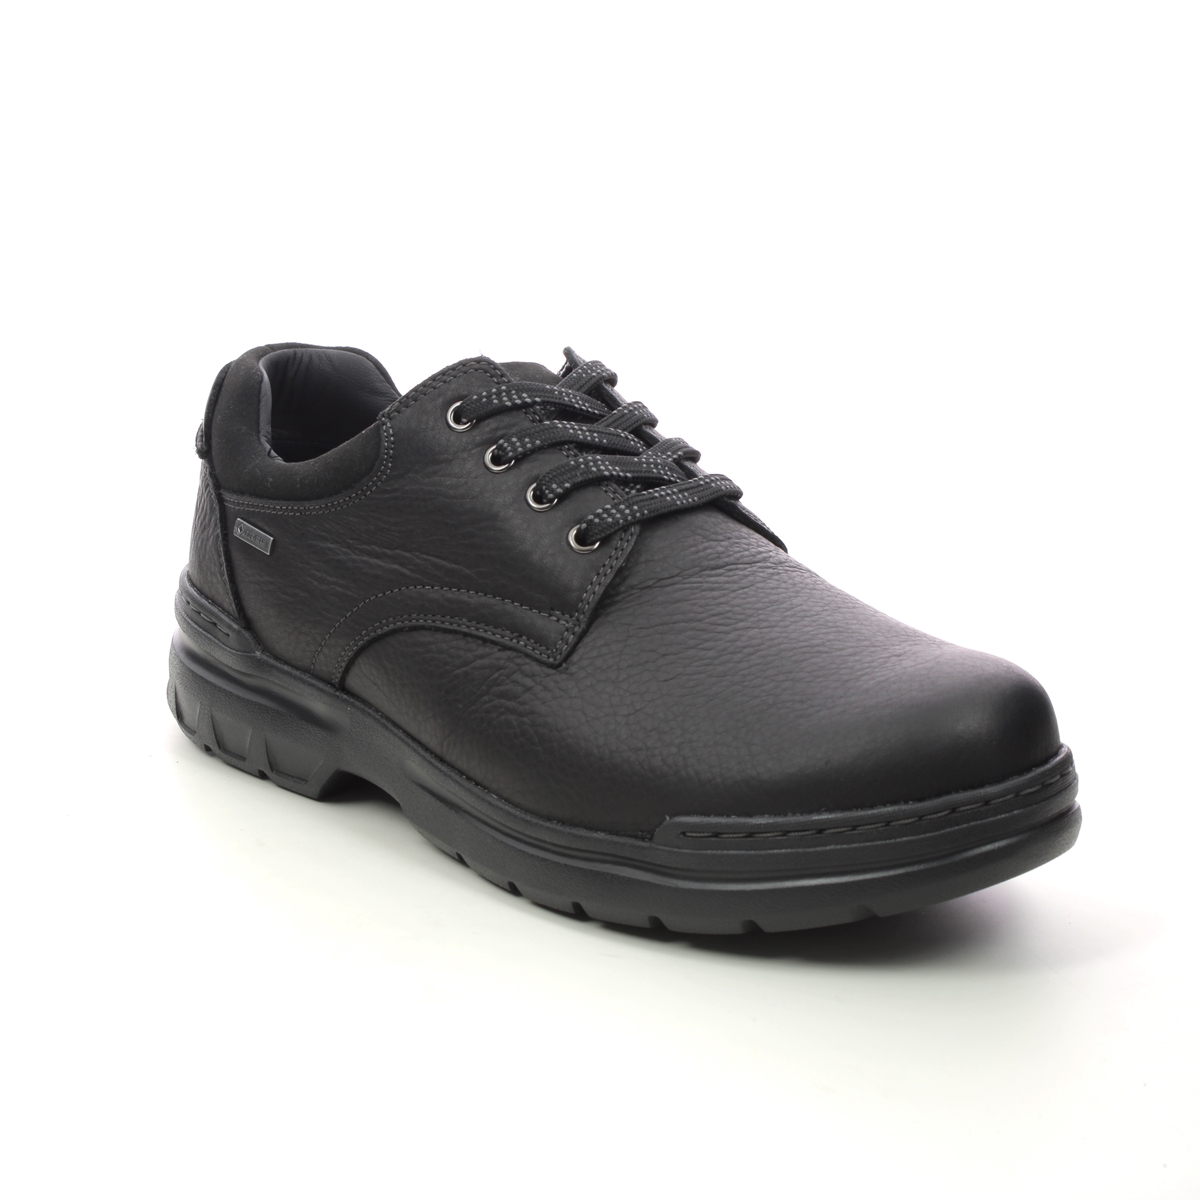 Clarks Rockie Walk Gtx Black Leather Mens Comfort Shoes 734648H In Size 8.5 In Plain Black Leather H Width Fitting Extra Wide